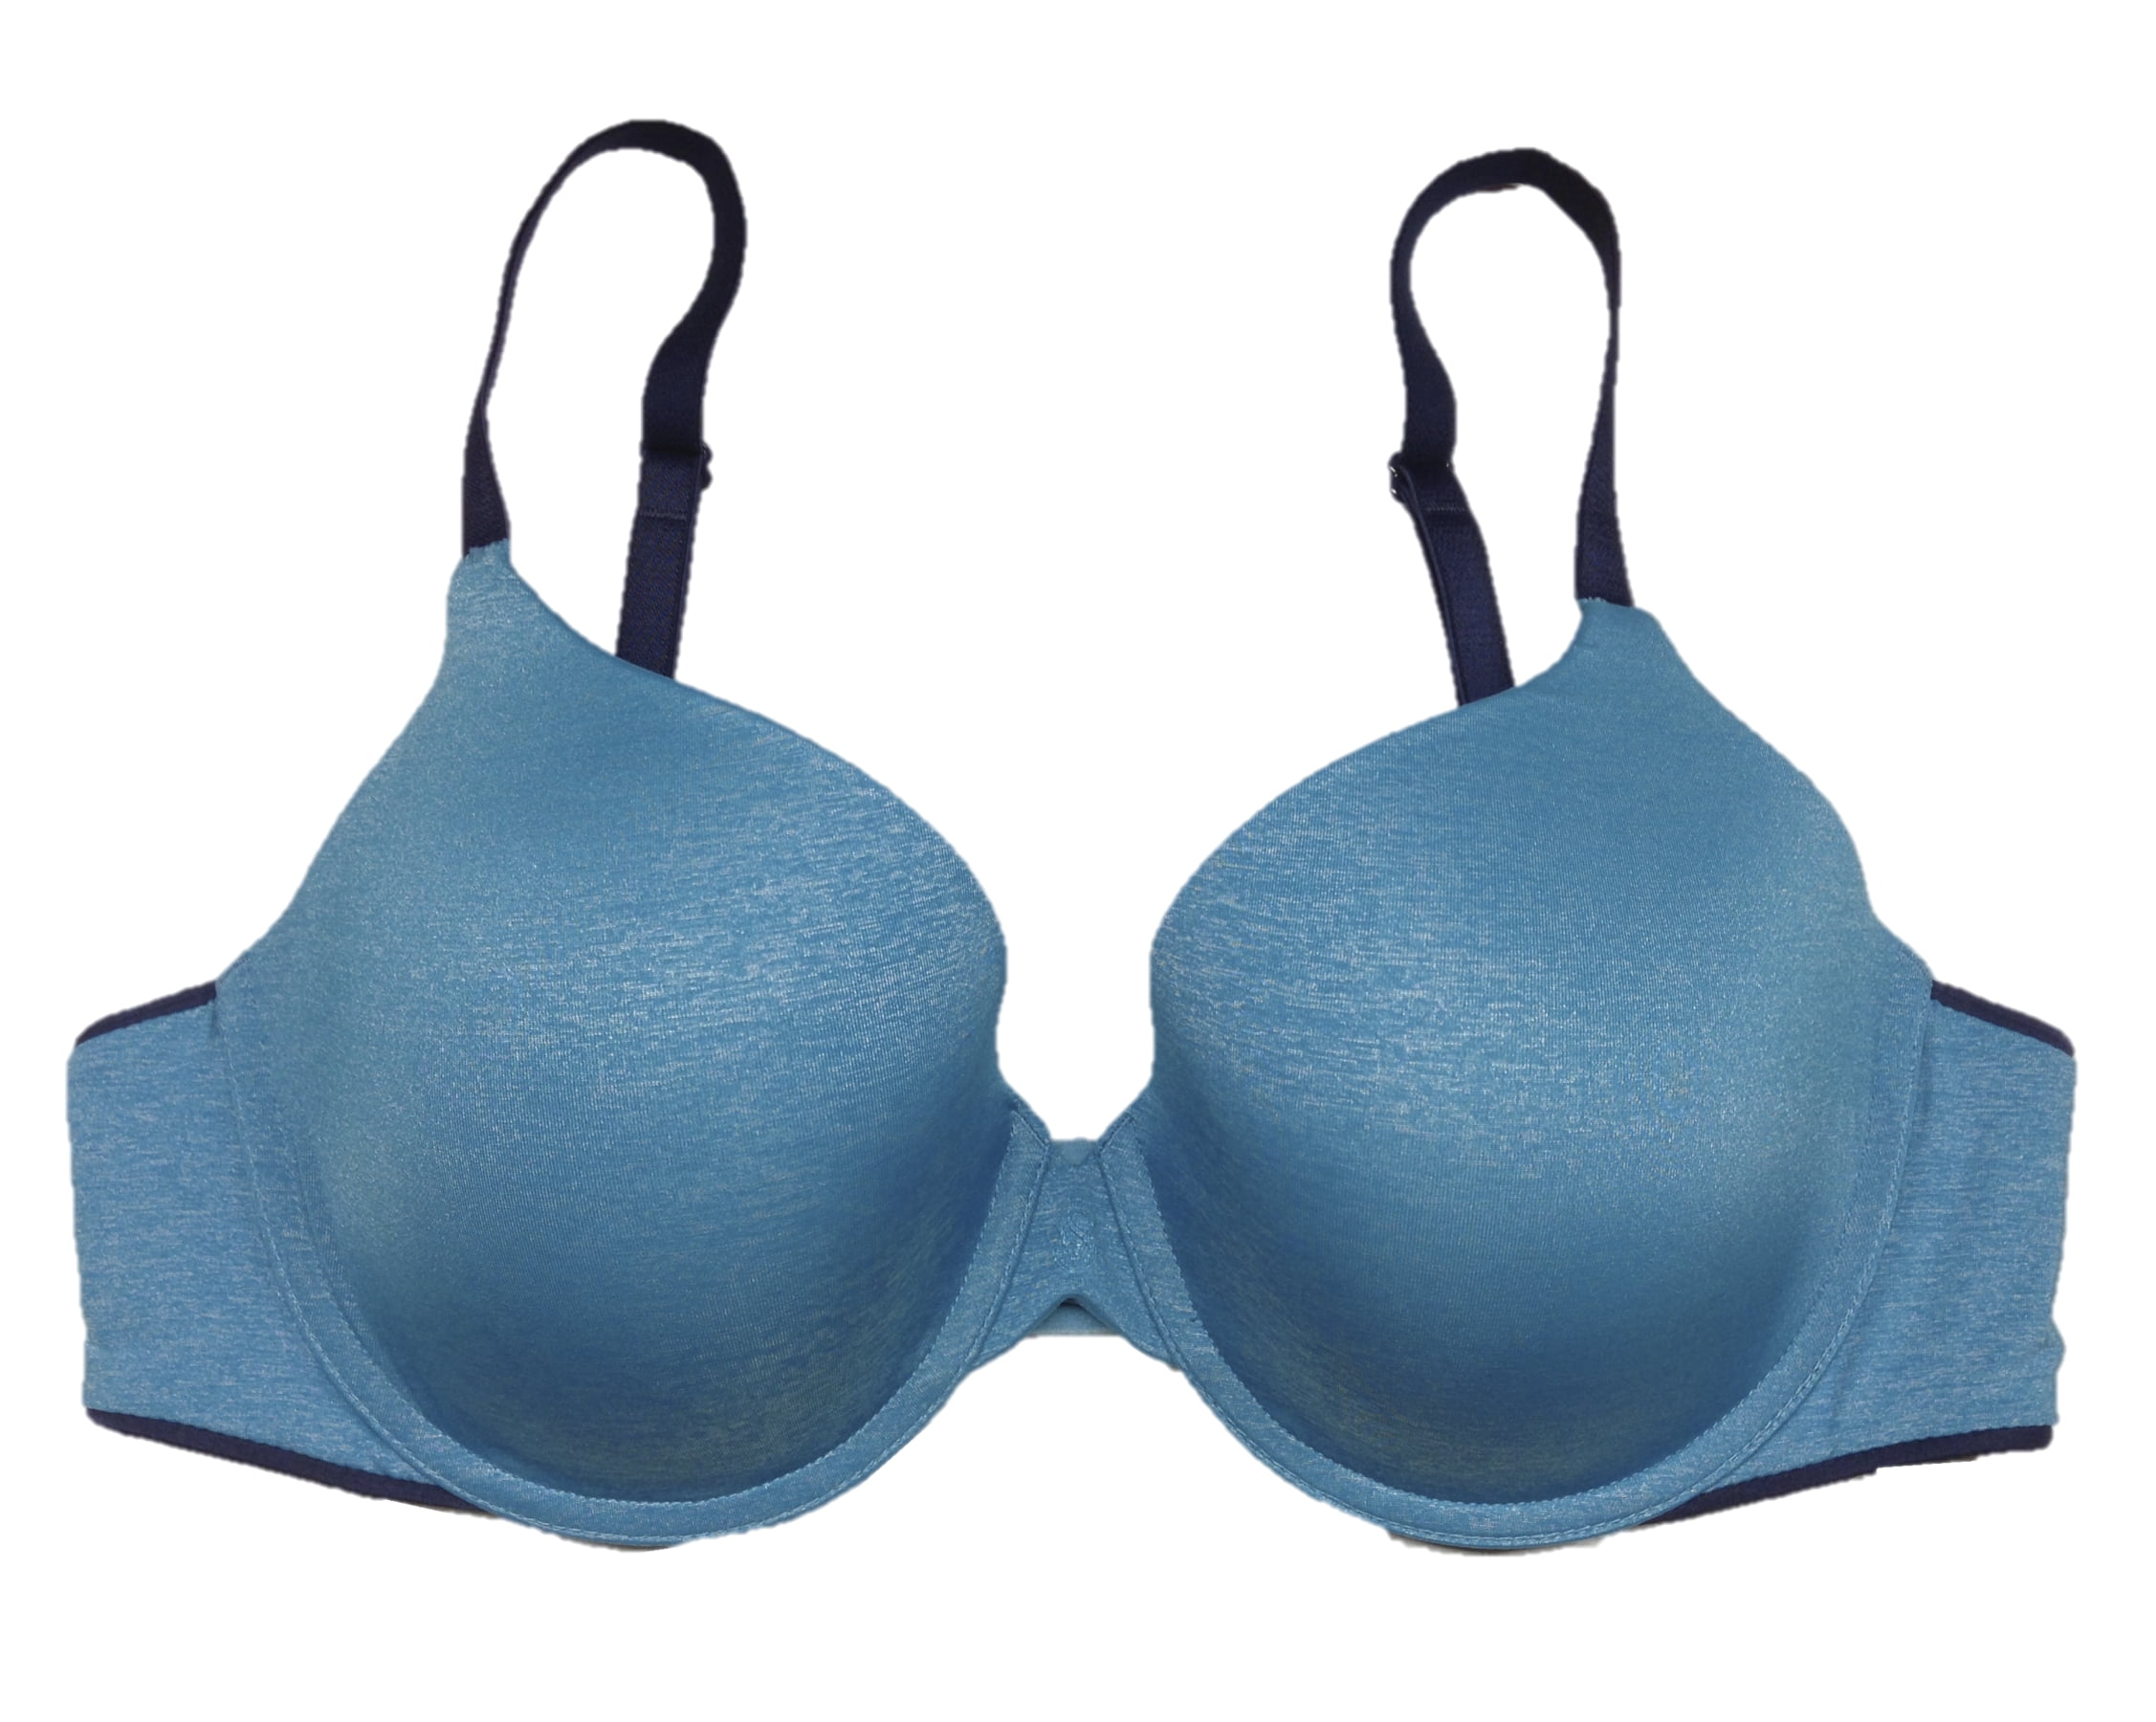 Victorias Secret Dream Uplift Bra 34A Blue Underwire Padded For Push Up  Biofit - Helia Beer Co